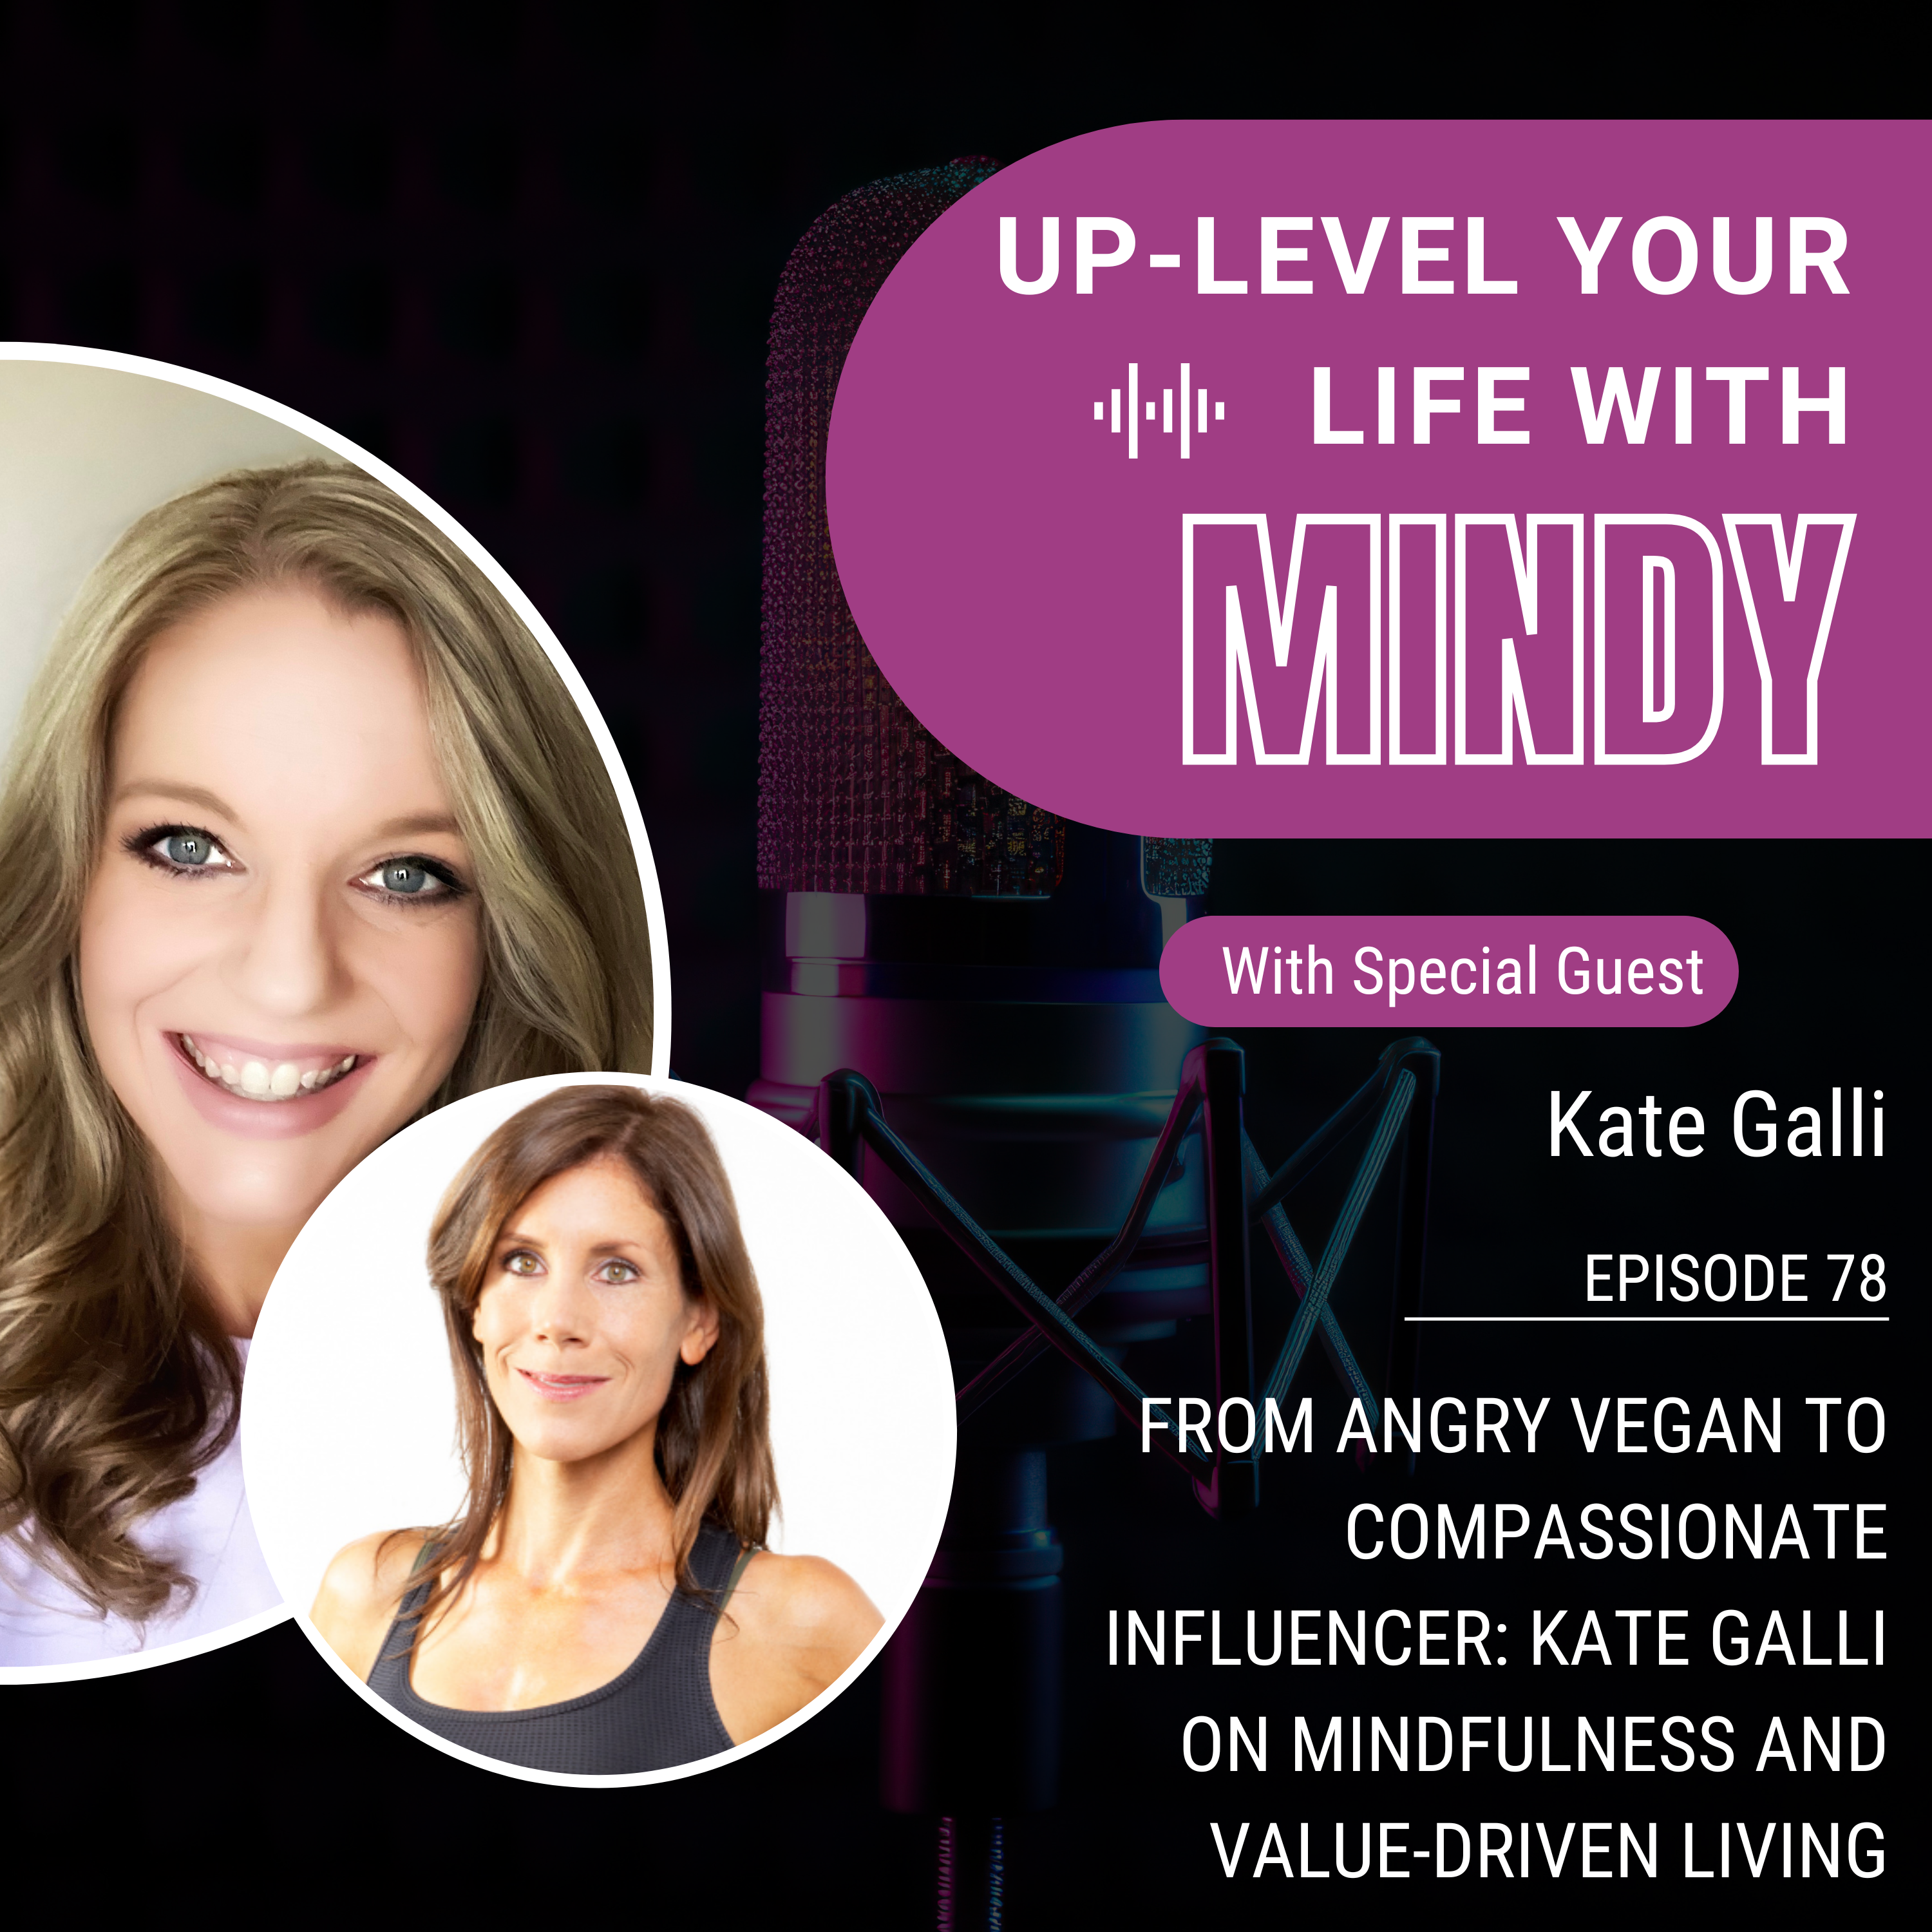 Up-Level Your Life: Kate Galli